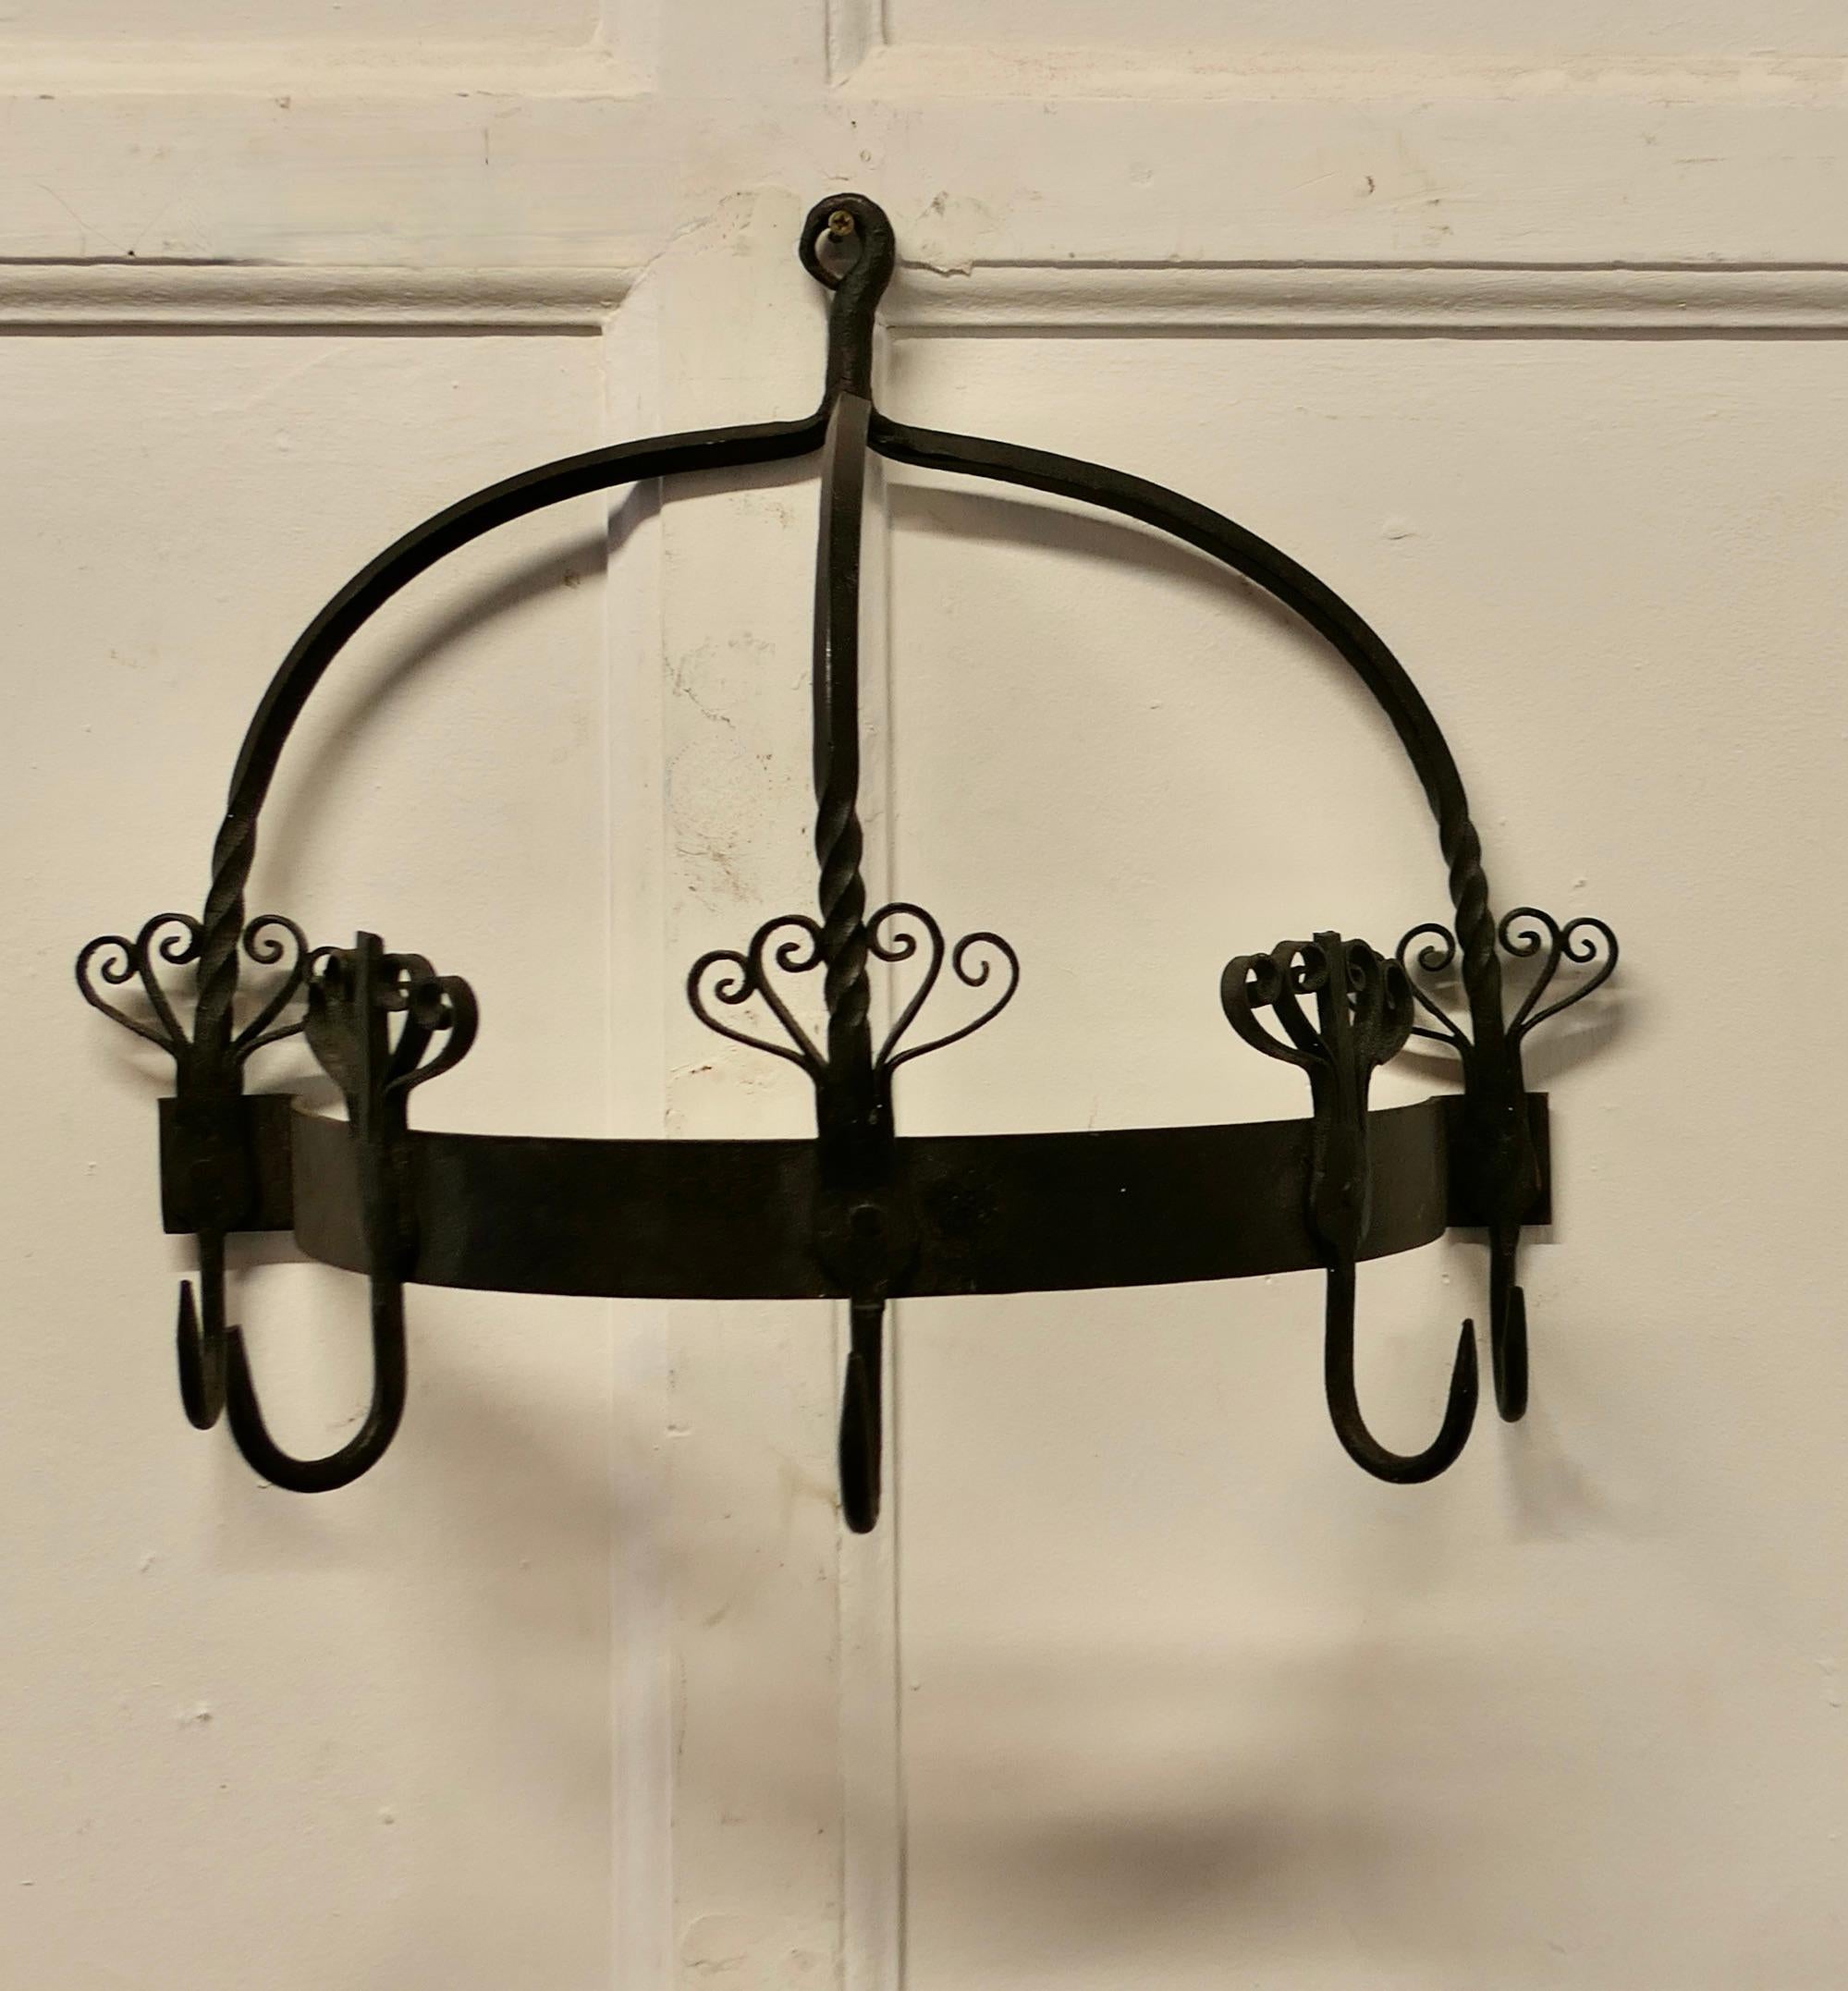  Half Round Blacksmith Made Iron Game Hanger, Kitchen Utensil Hanger

A great piece it is a half round shape with 4 large hooks, it sits flat on the wall, if you don’t need it to hang your game on how about your pots or kitchen utensils
The hanger